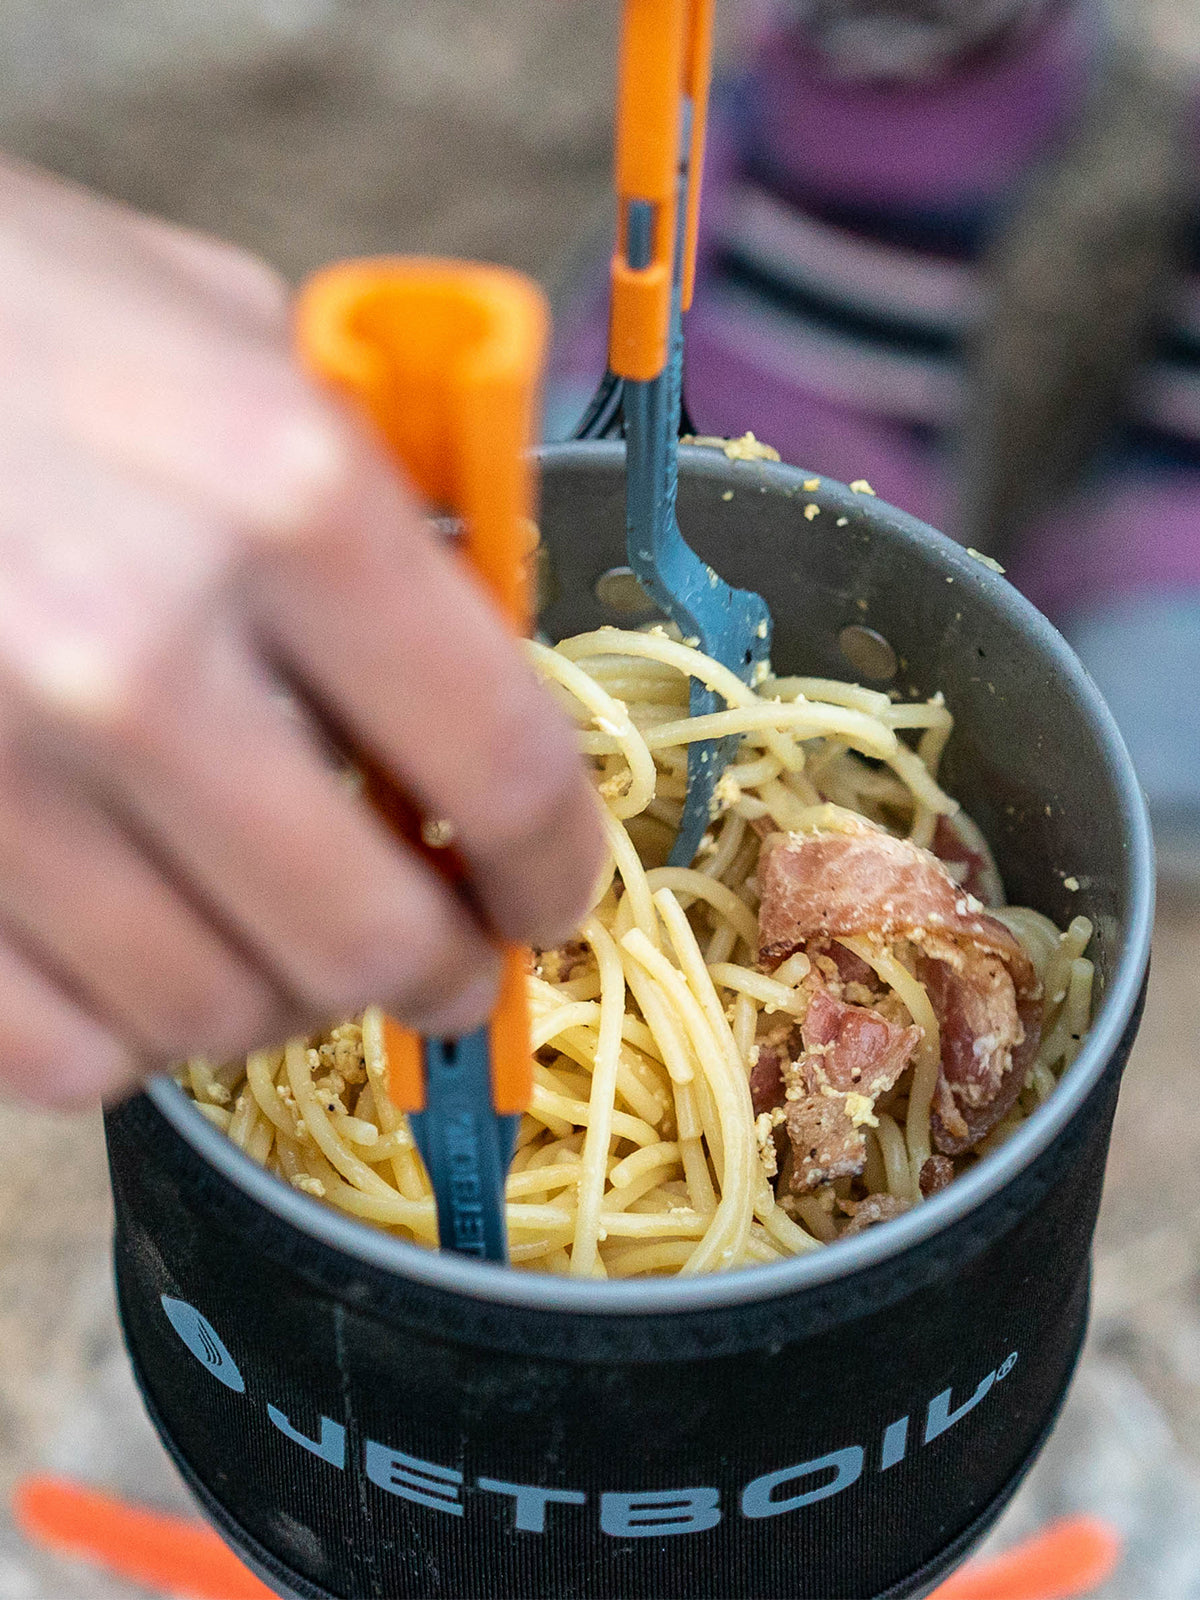 Jetboil MiniMo review: a versatile cooking system for your next